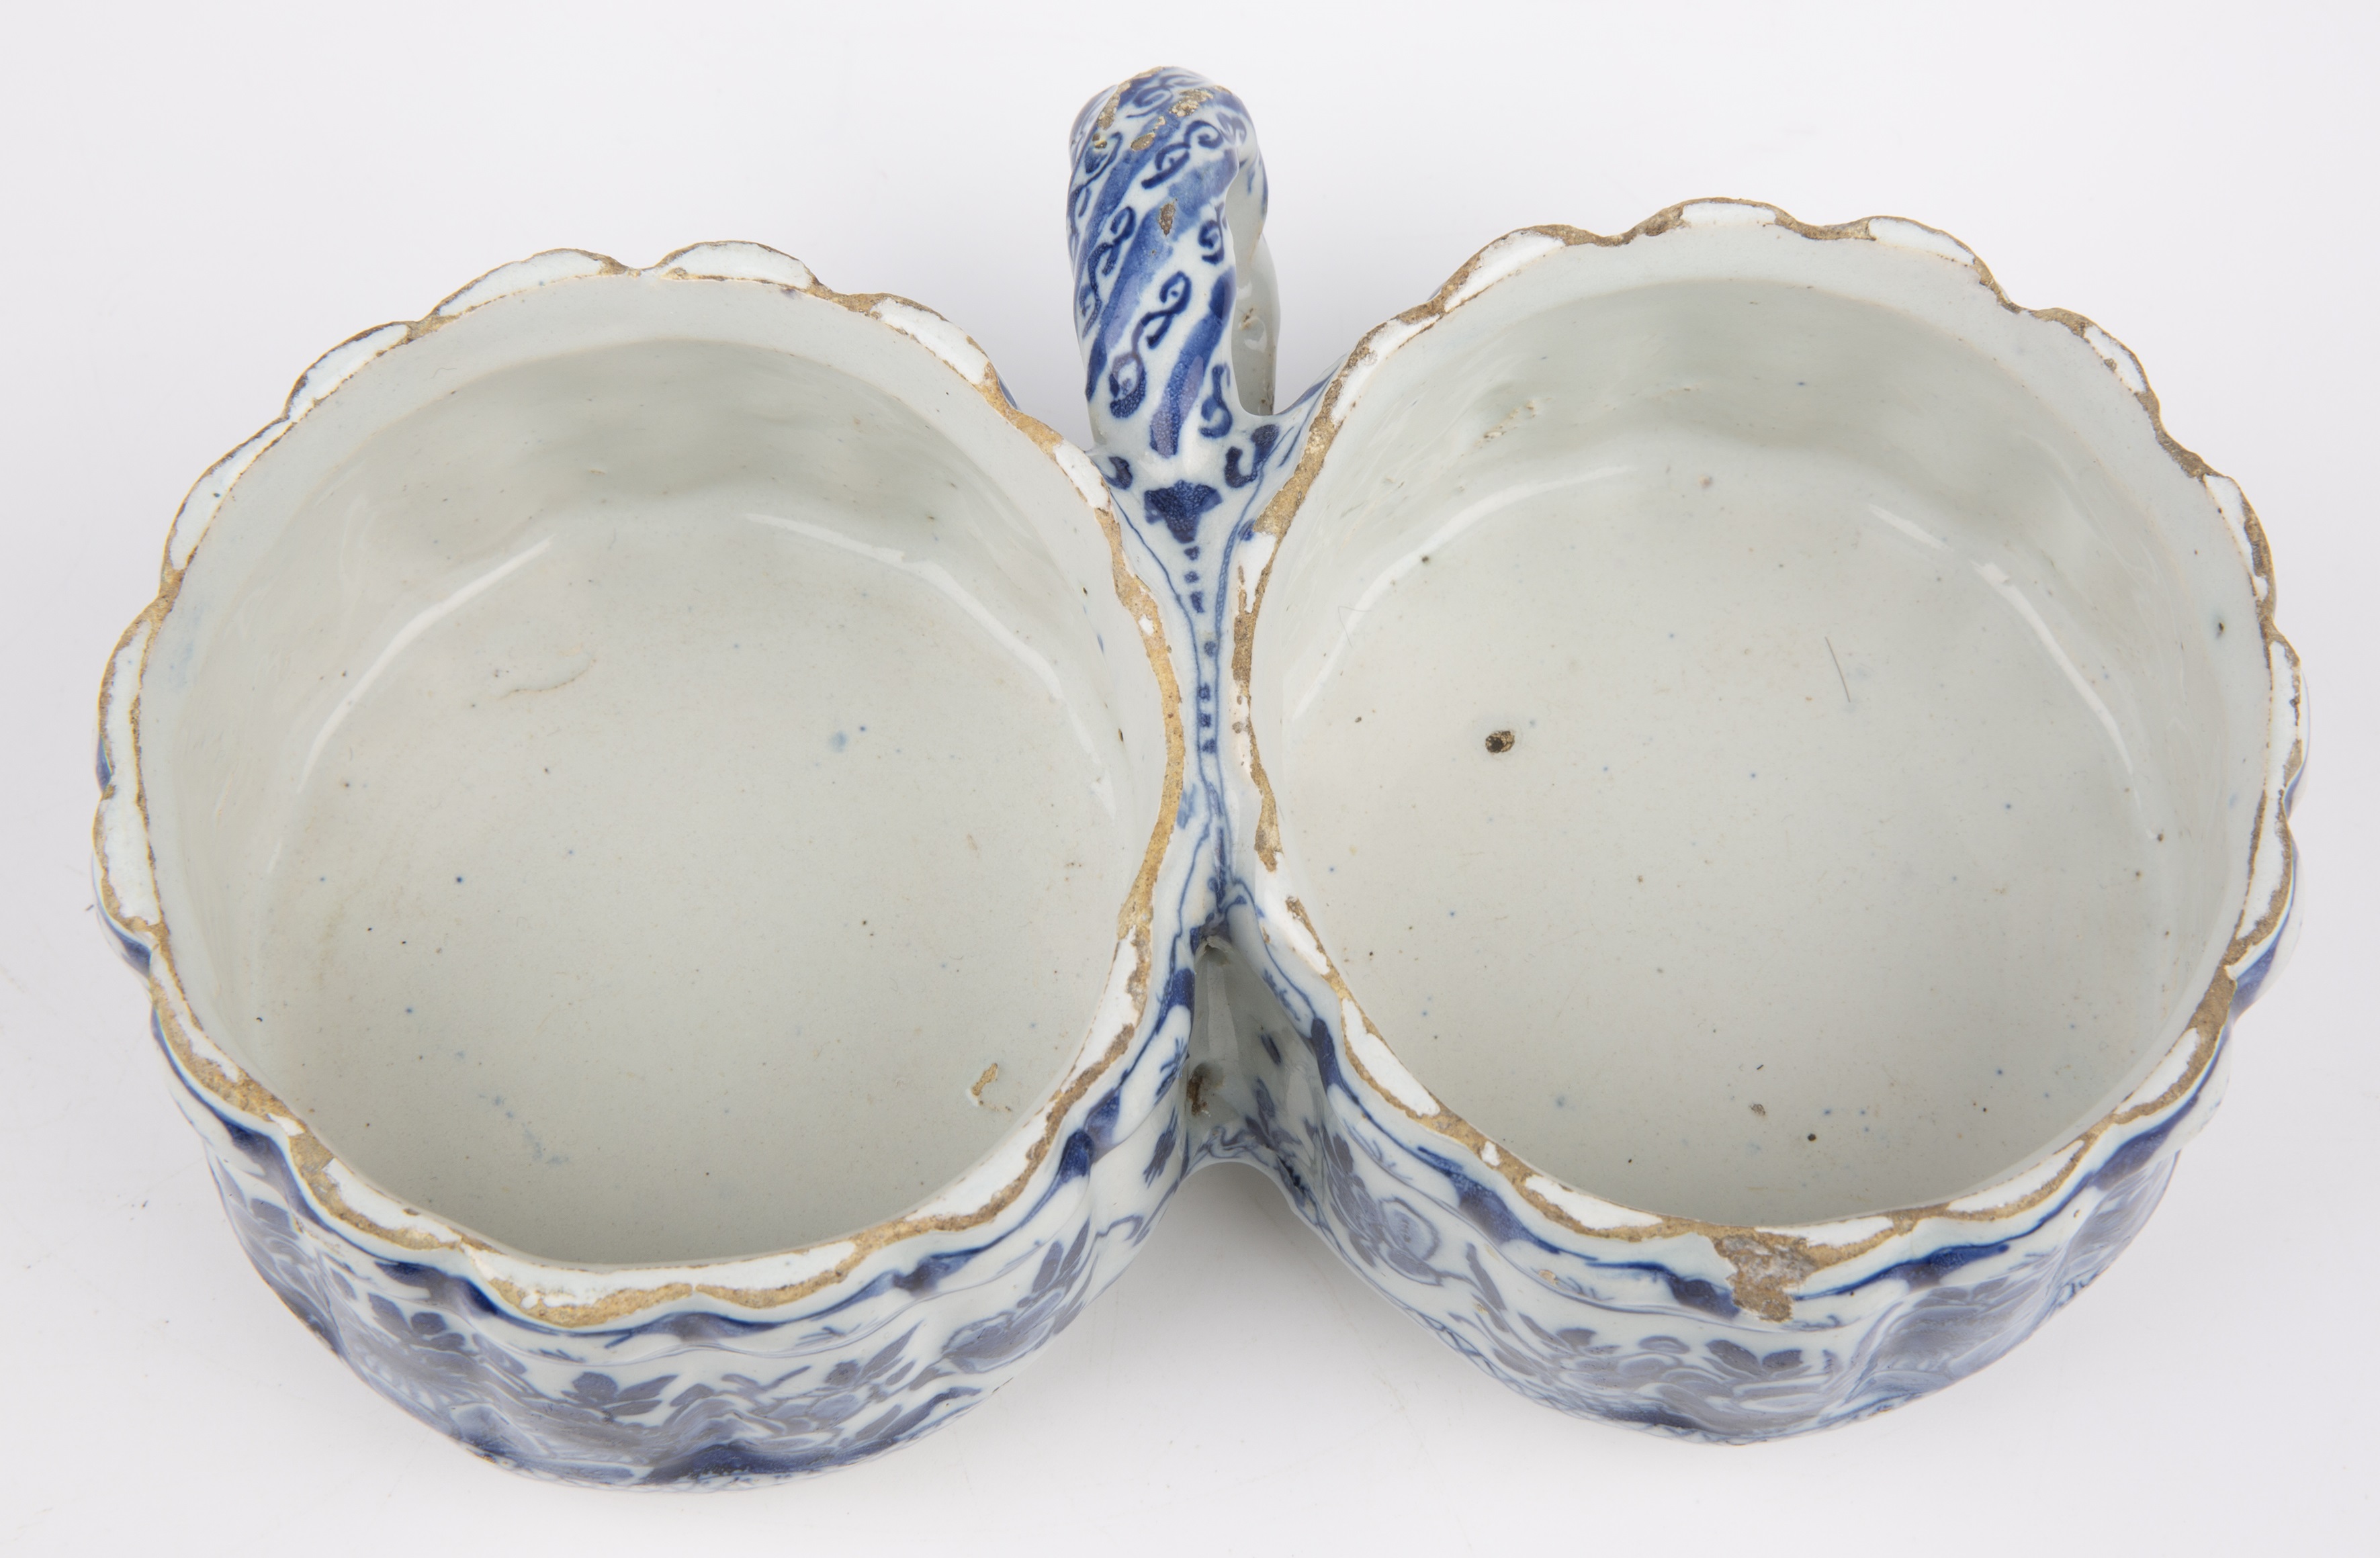 An early 18th century Delft cruet cira 1720, 19.5cm wide 7cm high Good with glaze chips - Image 6 of 6